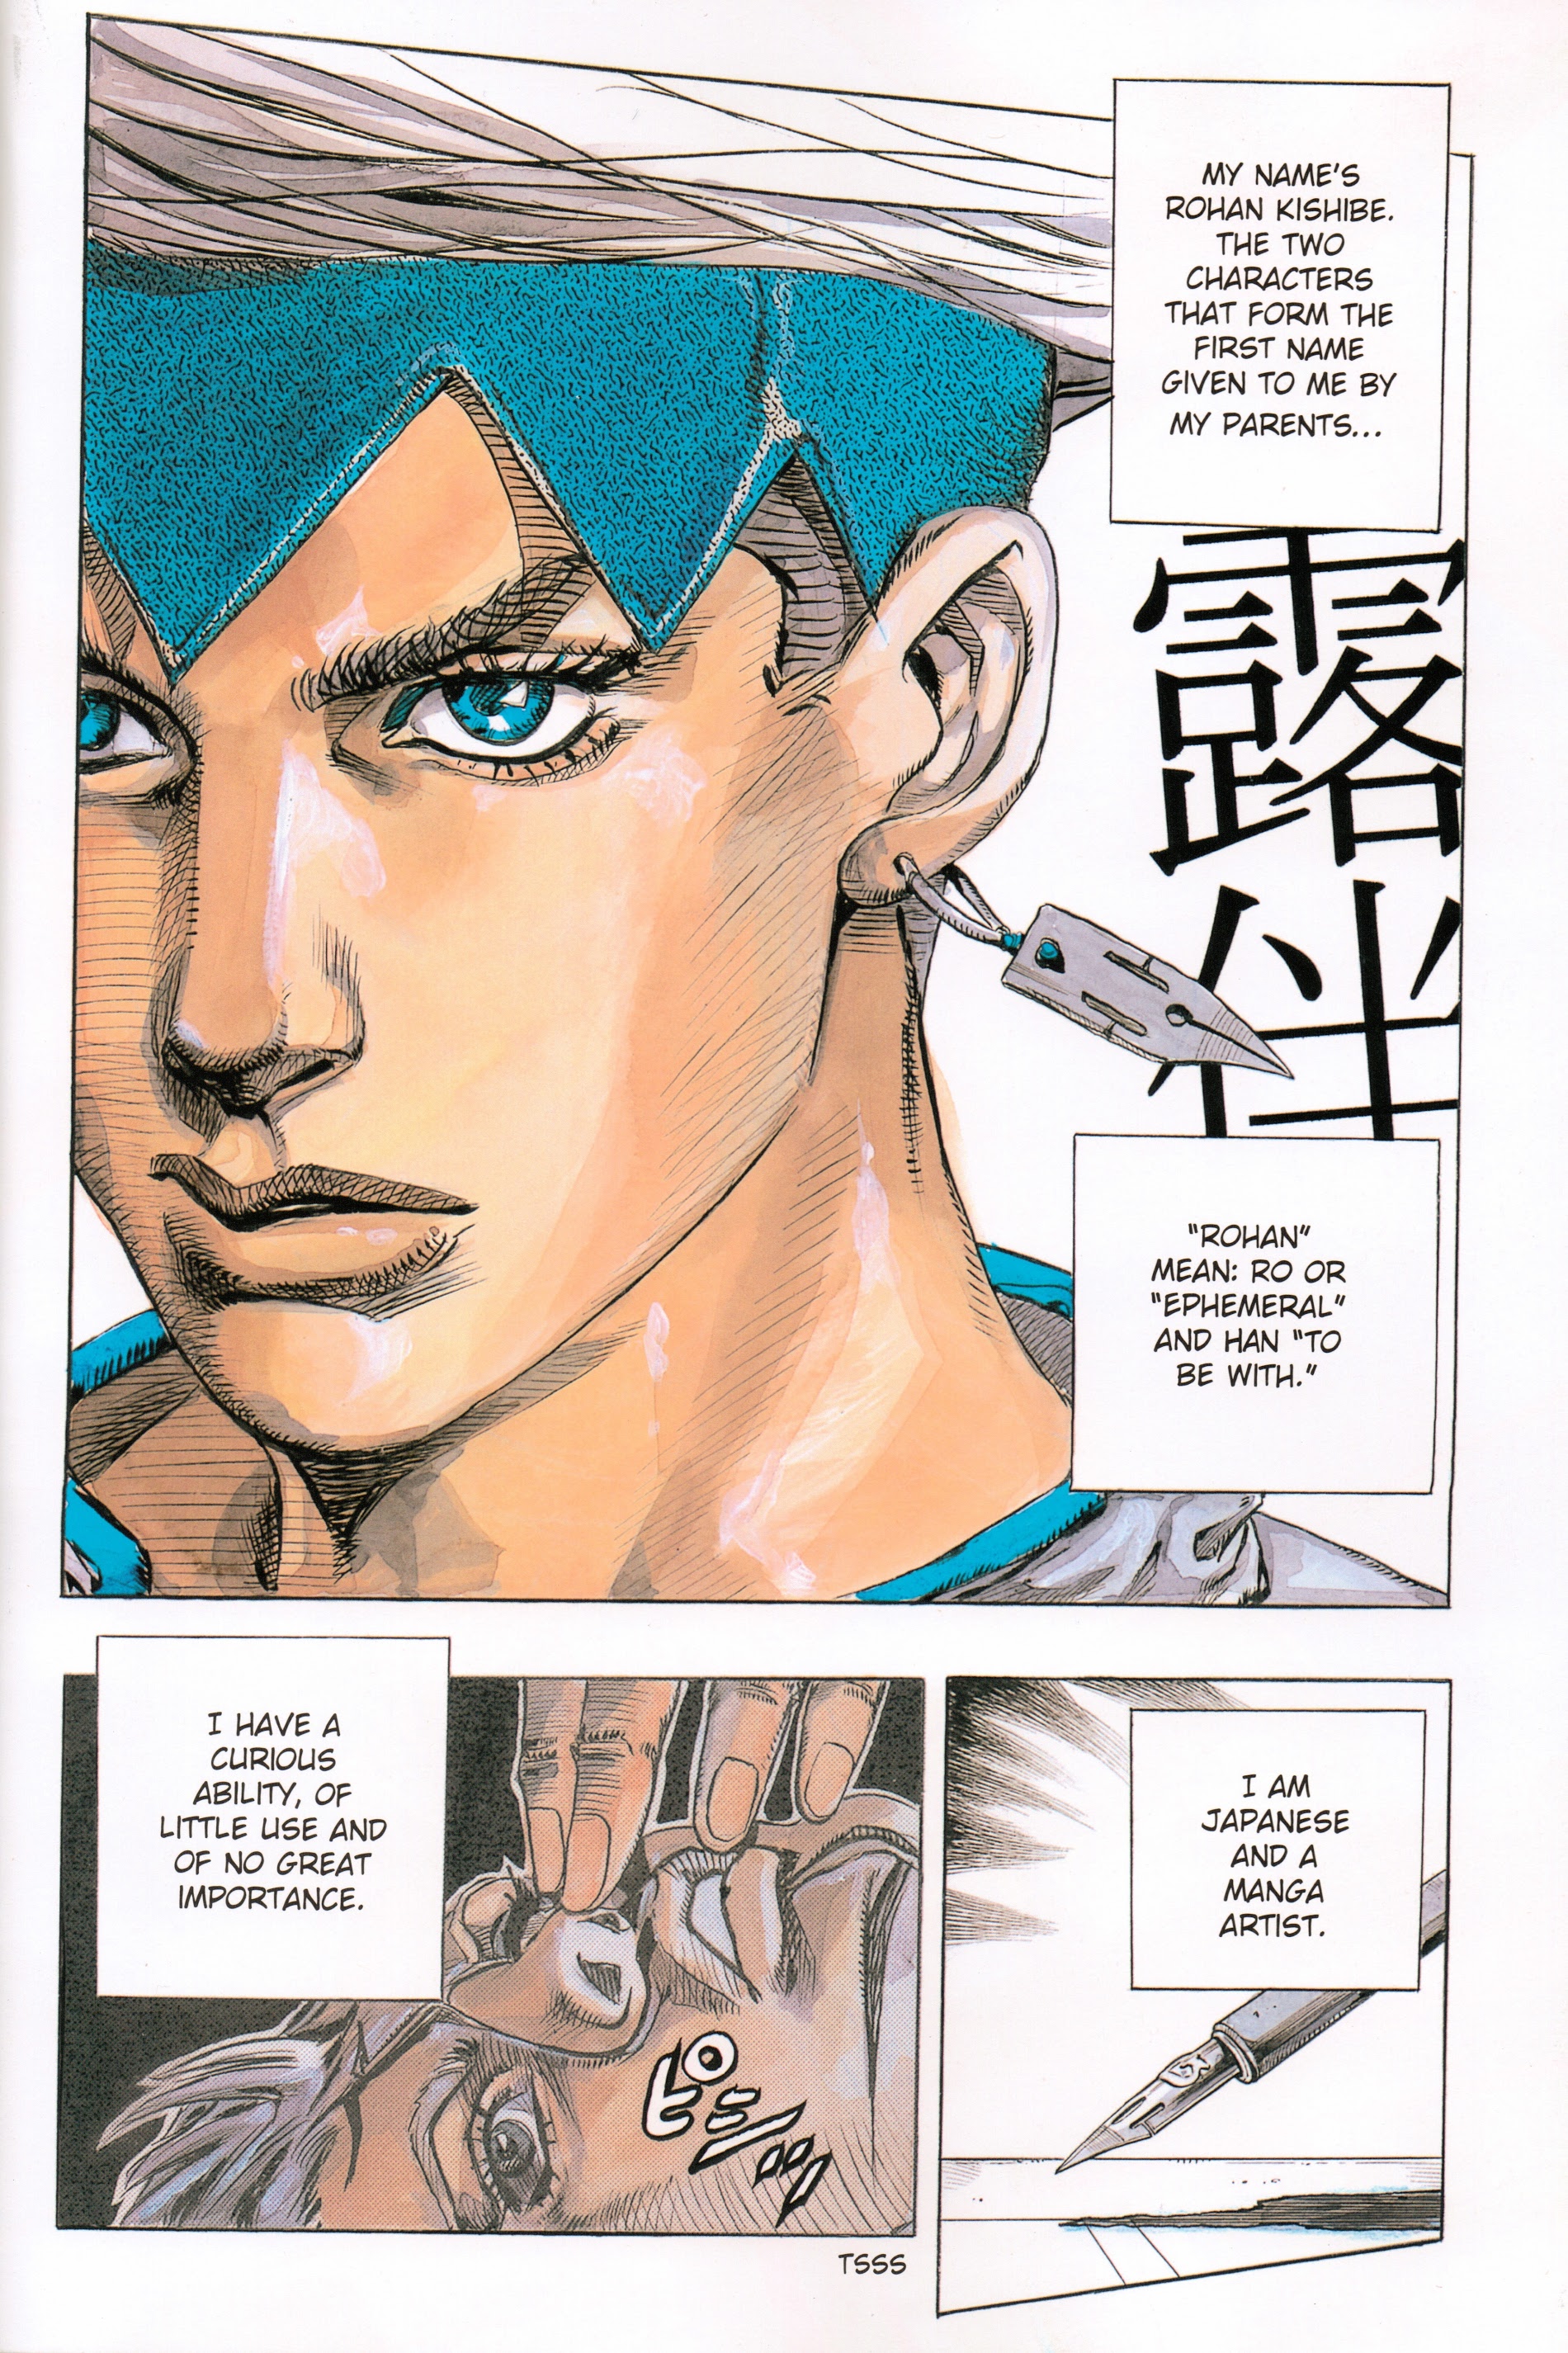 Rohan At The Louvre - Page 1